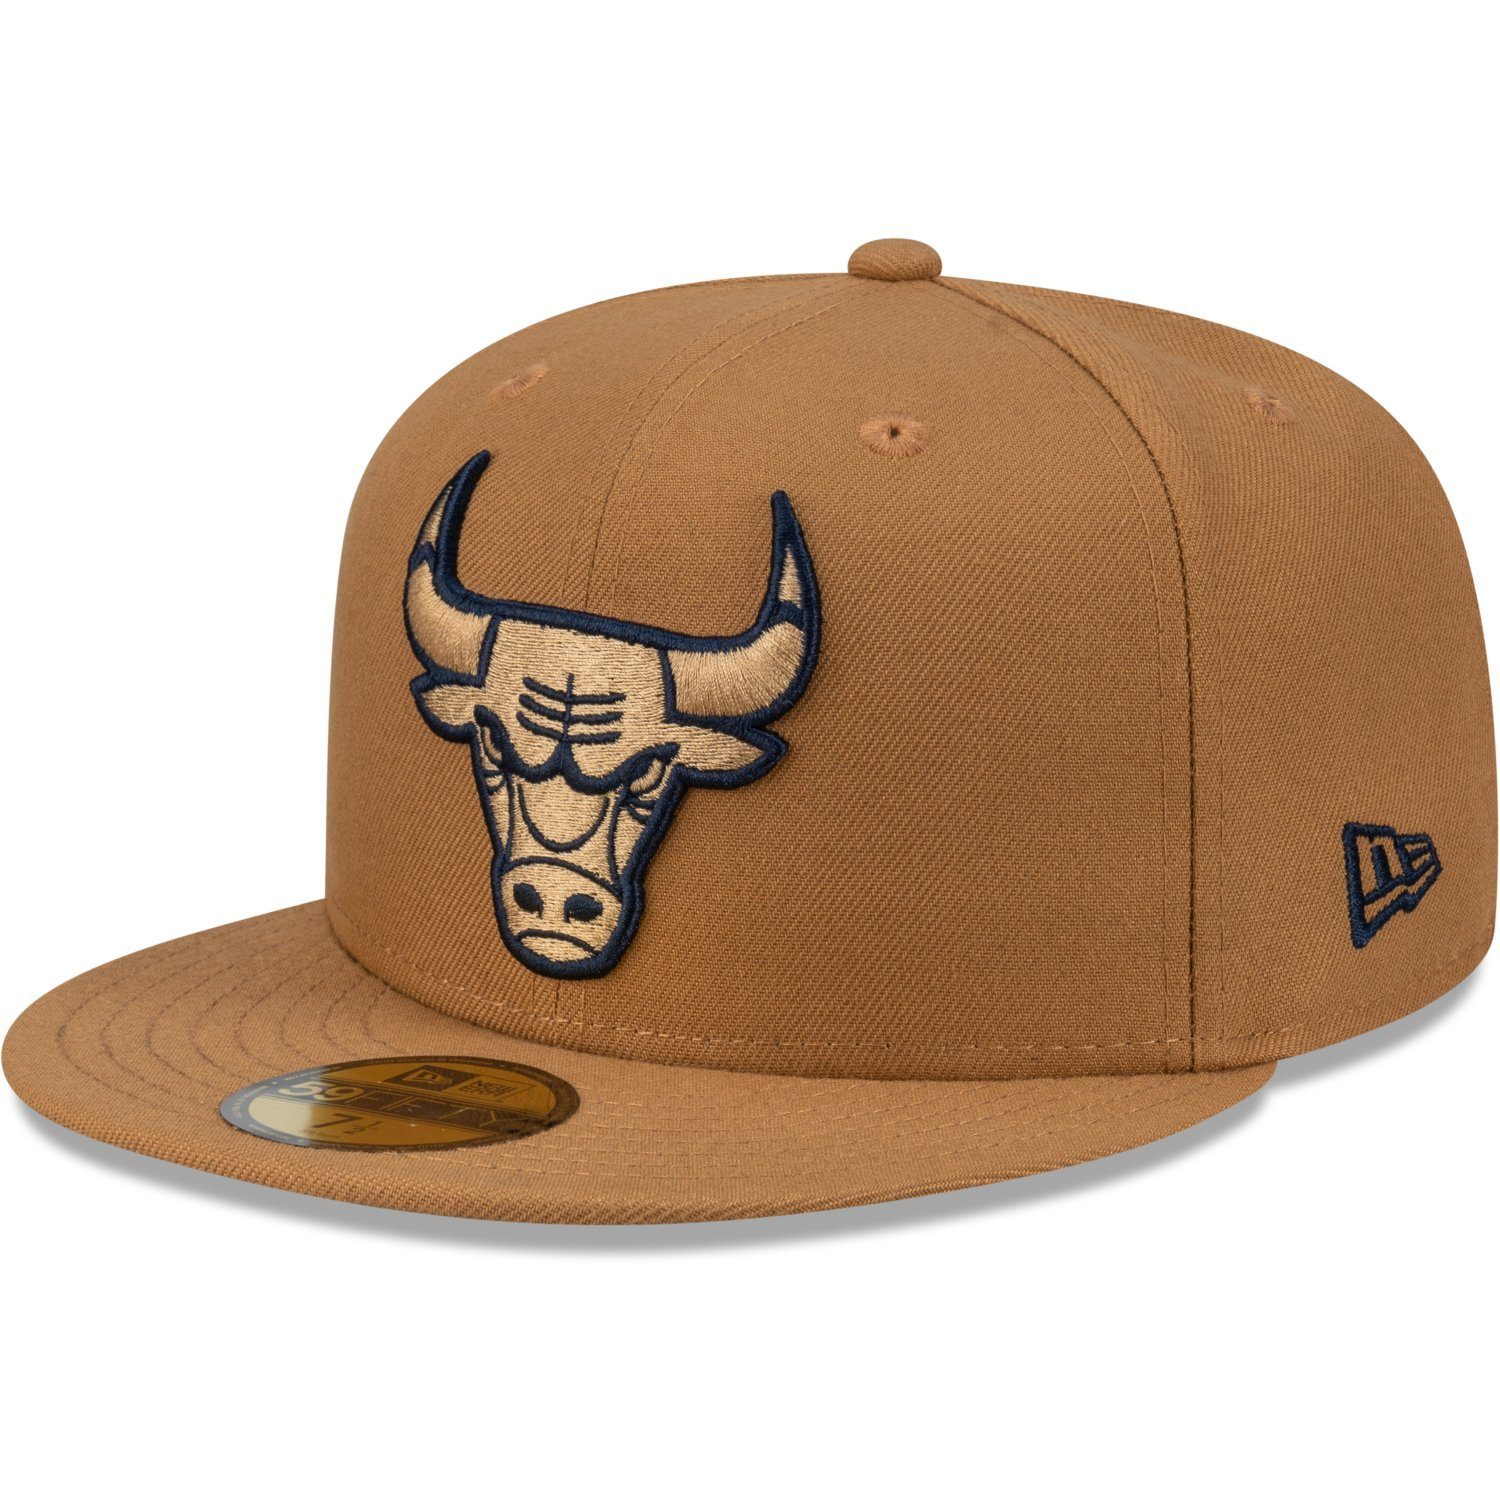 New Era Cap 59Fifty Fitted NBA Bulls Chicago